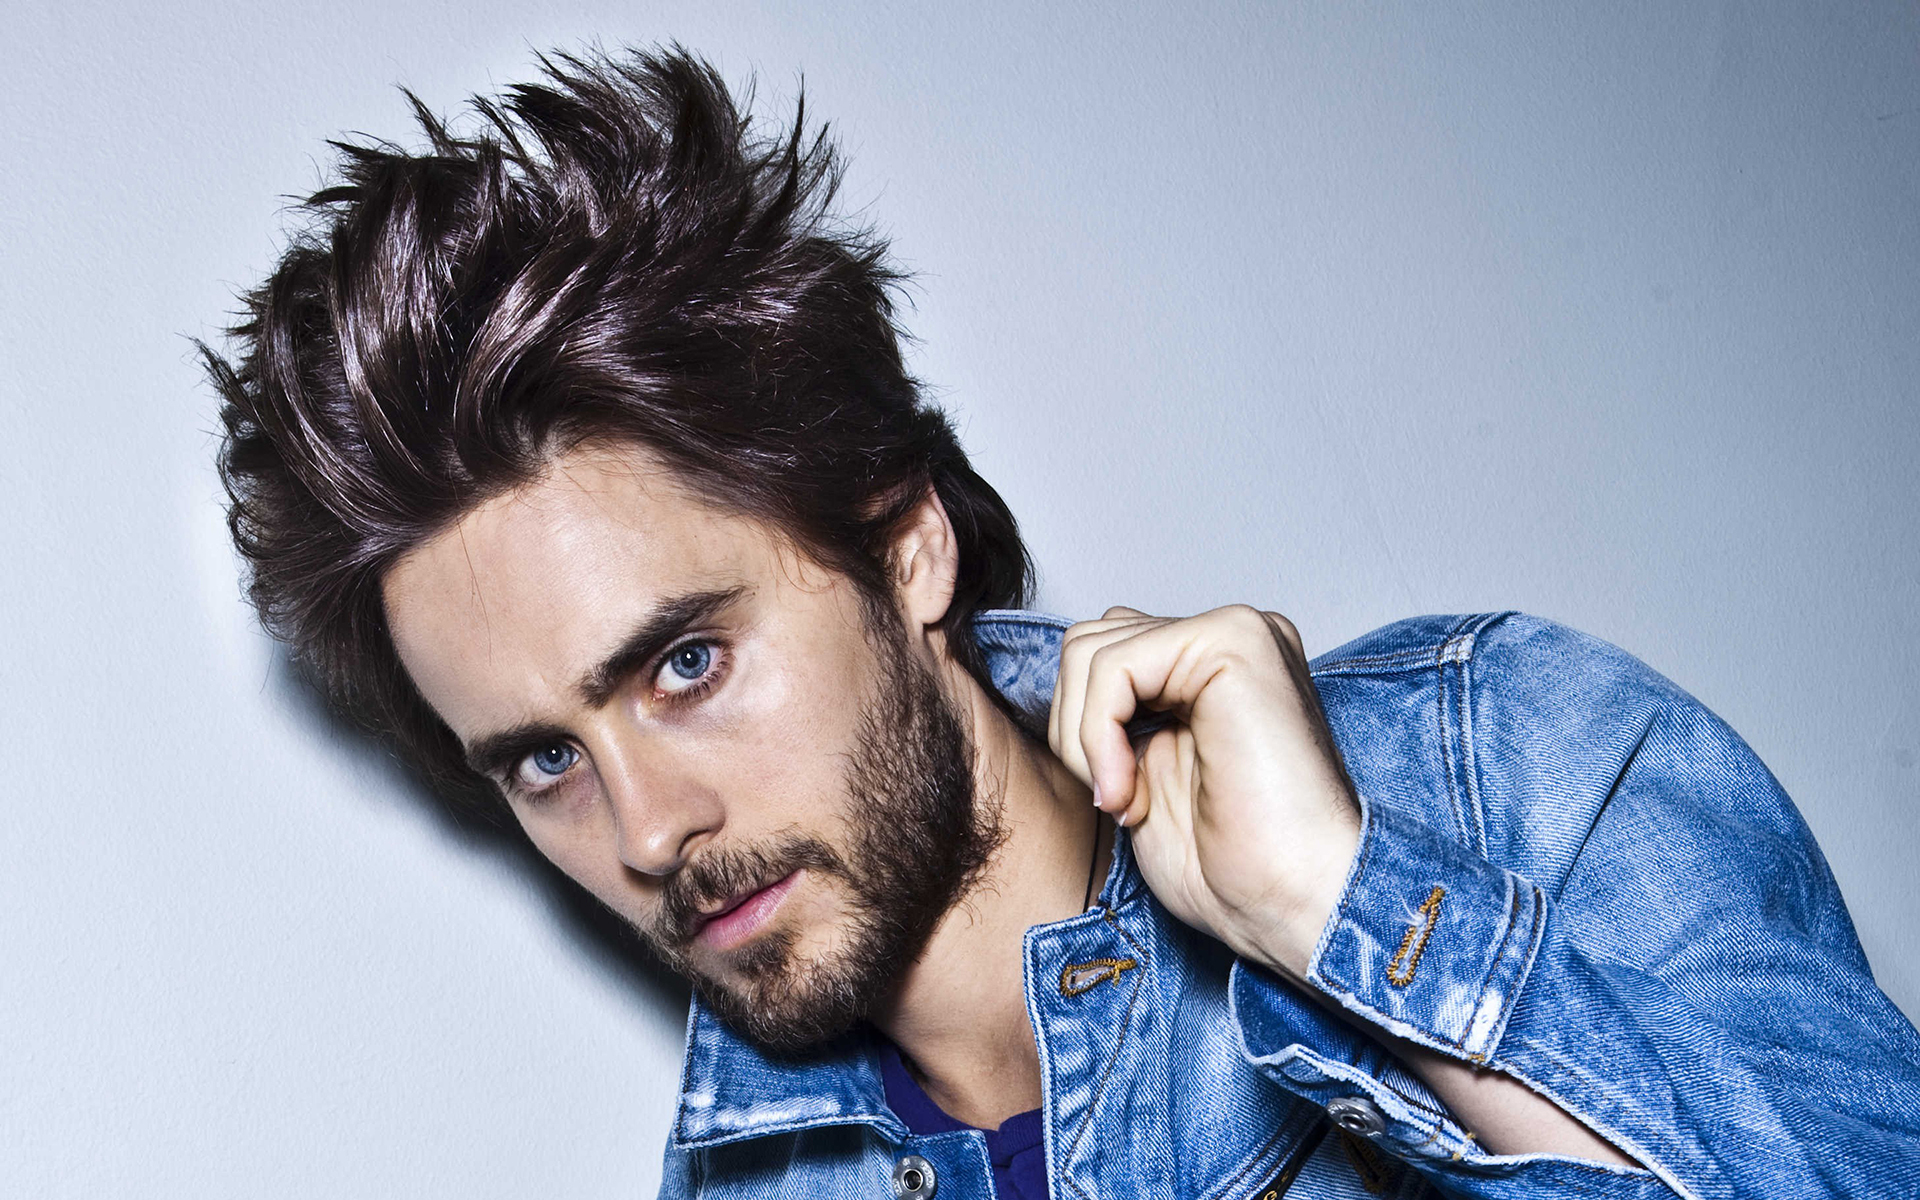 Free Download Stylish Hollywood Actor Jared Leto Wallpaper Best Hd 19x10 For Your Desktop Mobile Tablet Explore 78 Hollywood Male Actors Wallpapers Hollywood Male Actors Wallpapers Hollywood Actors Wallpaper